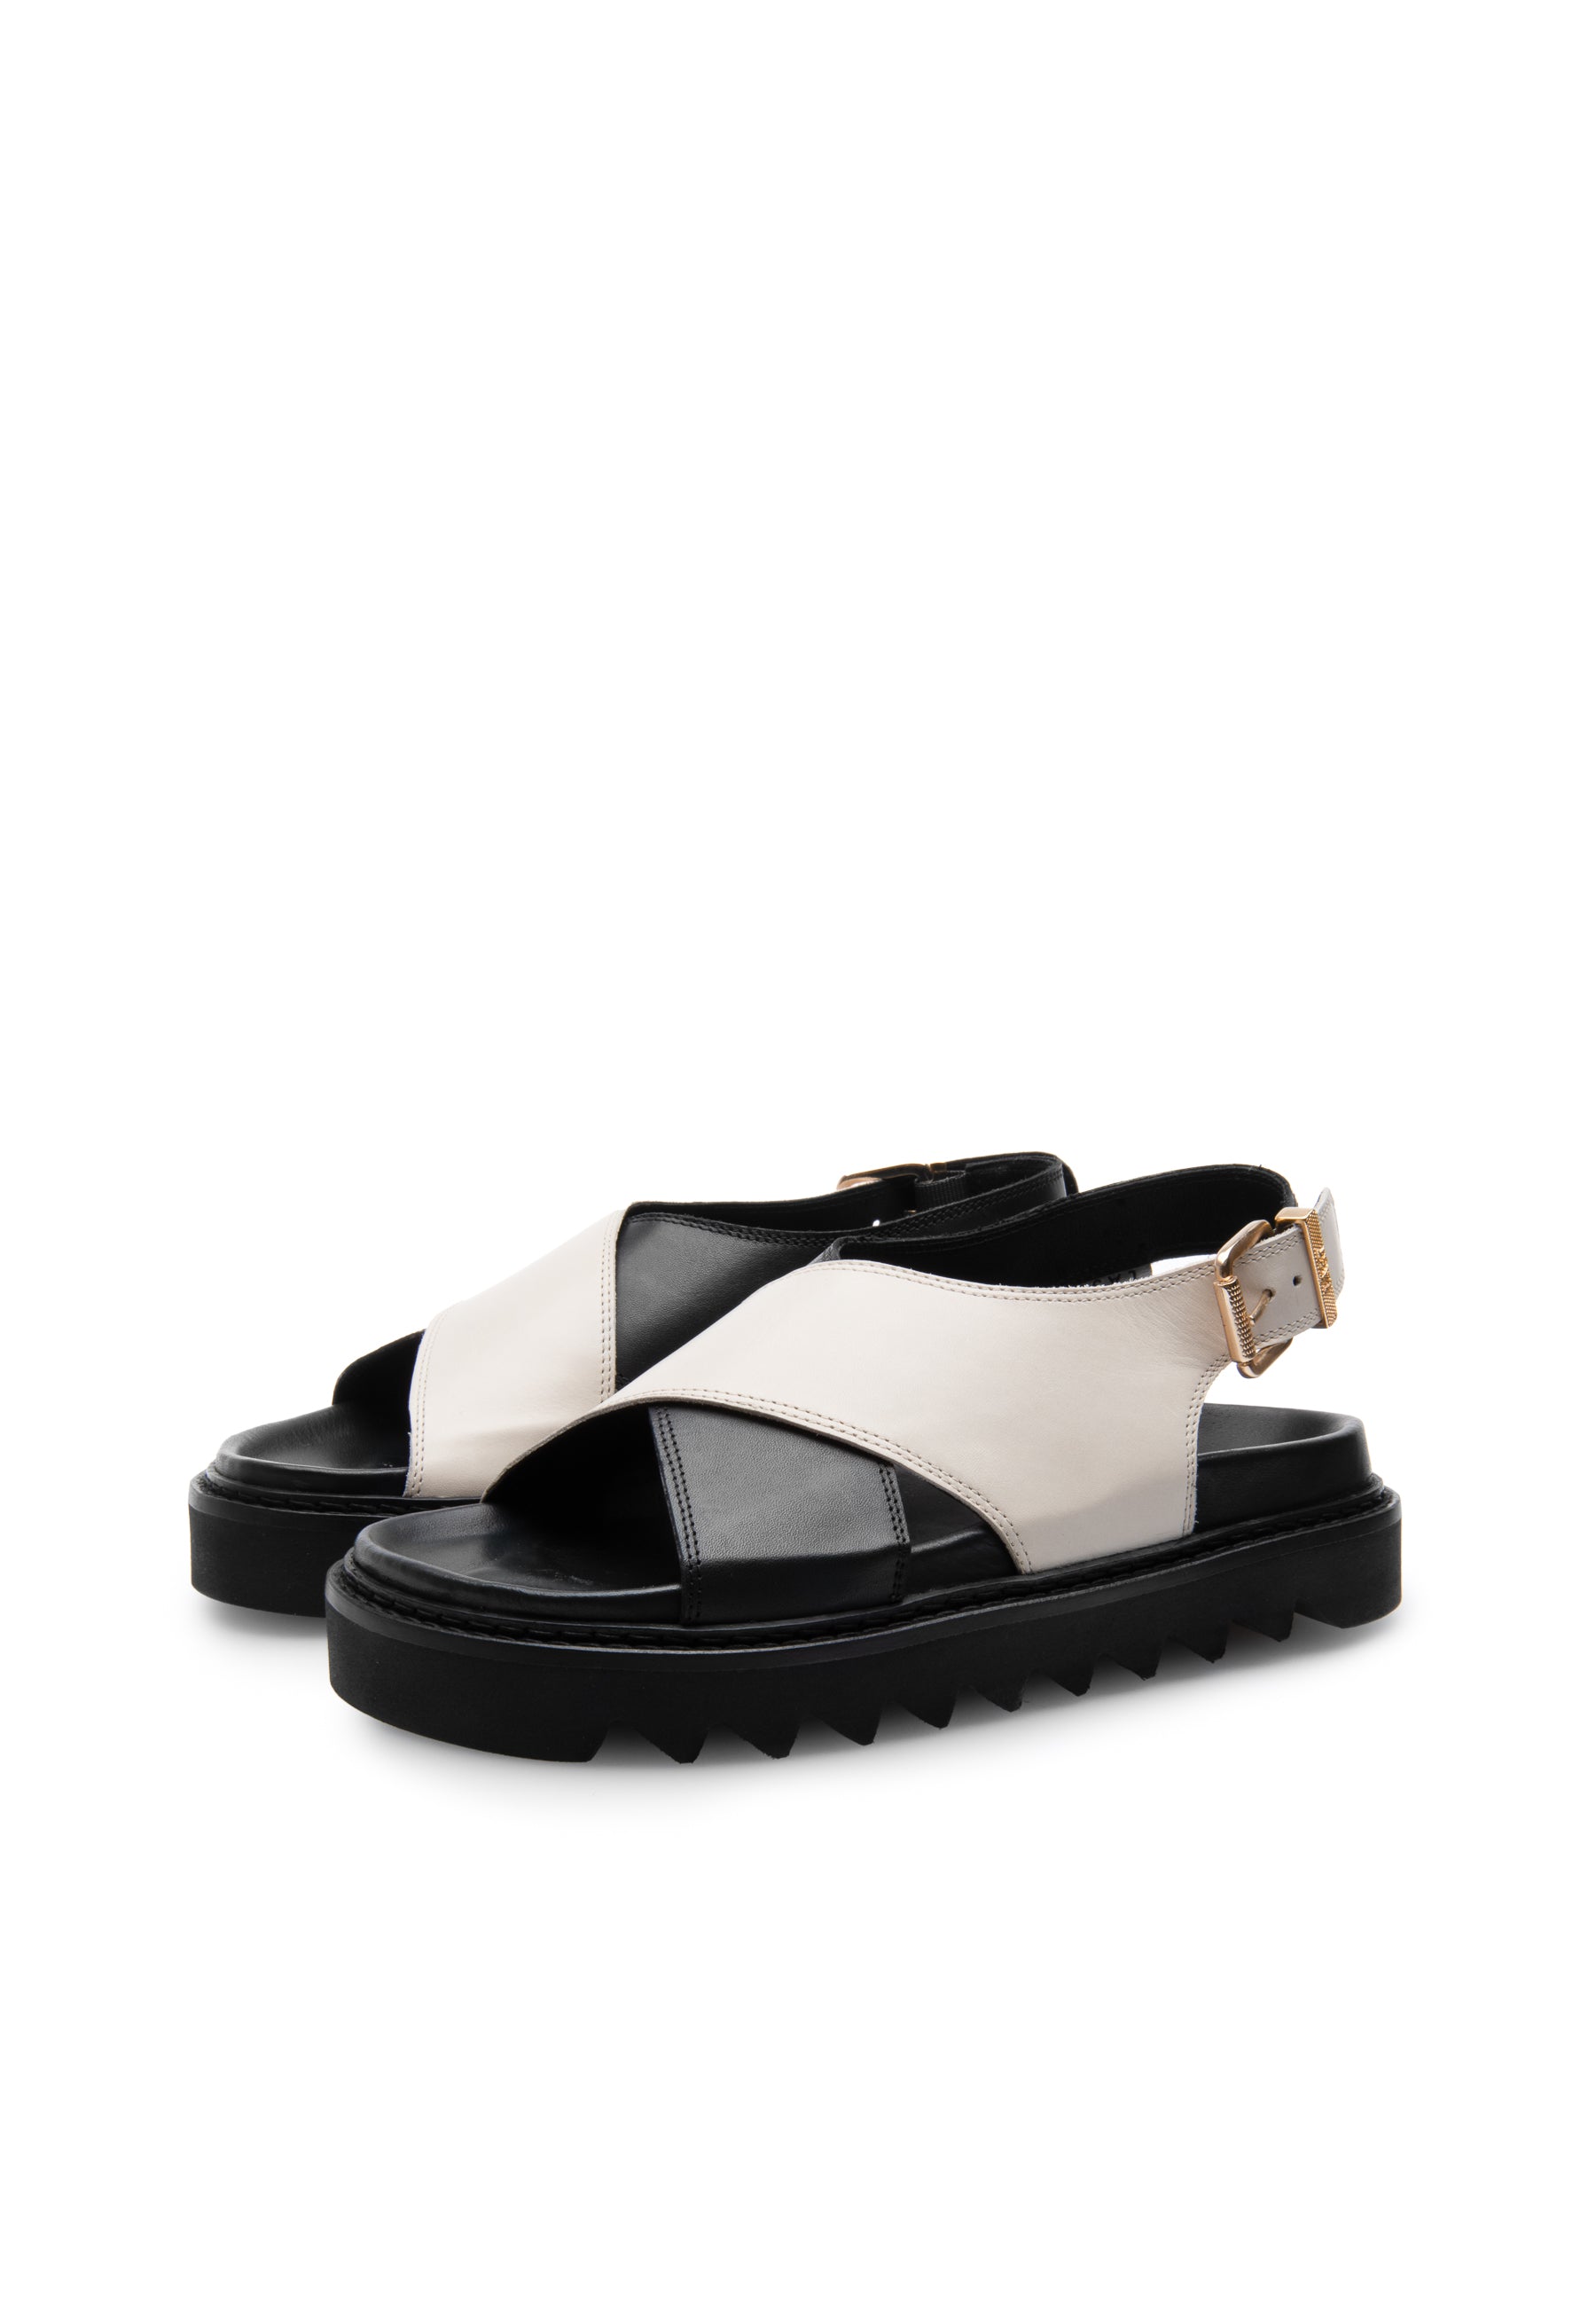 Diana Black Off White Leather Chunky Sandals LAST1522 - 3